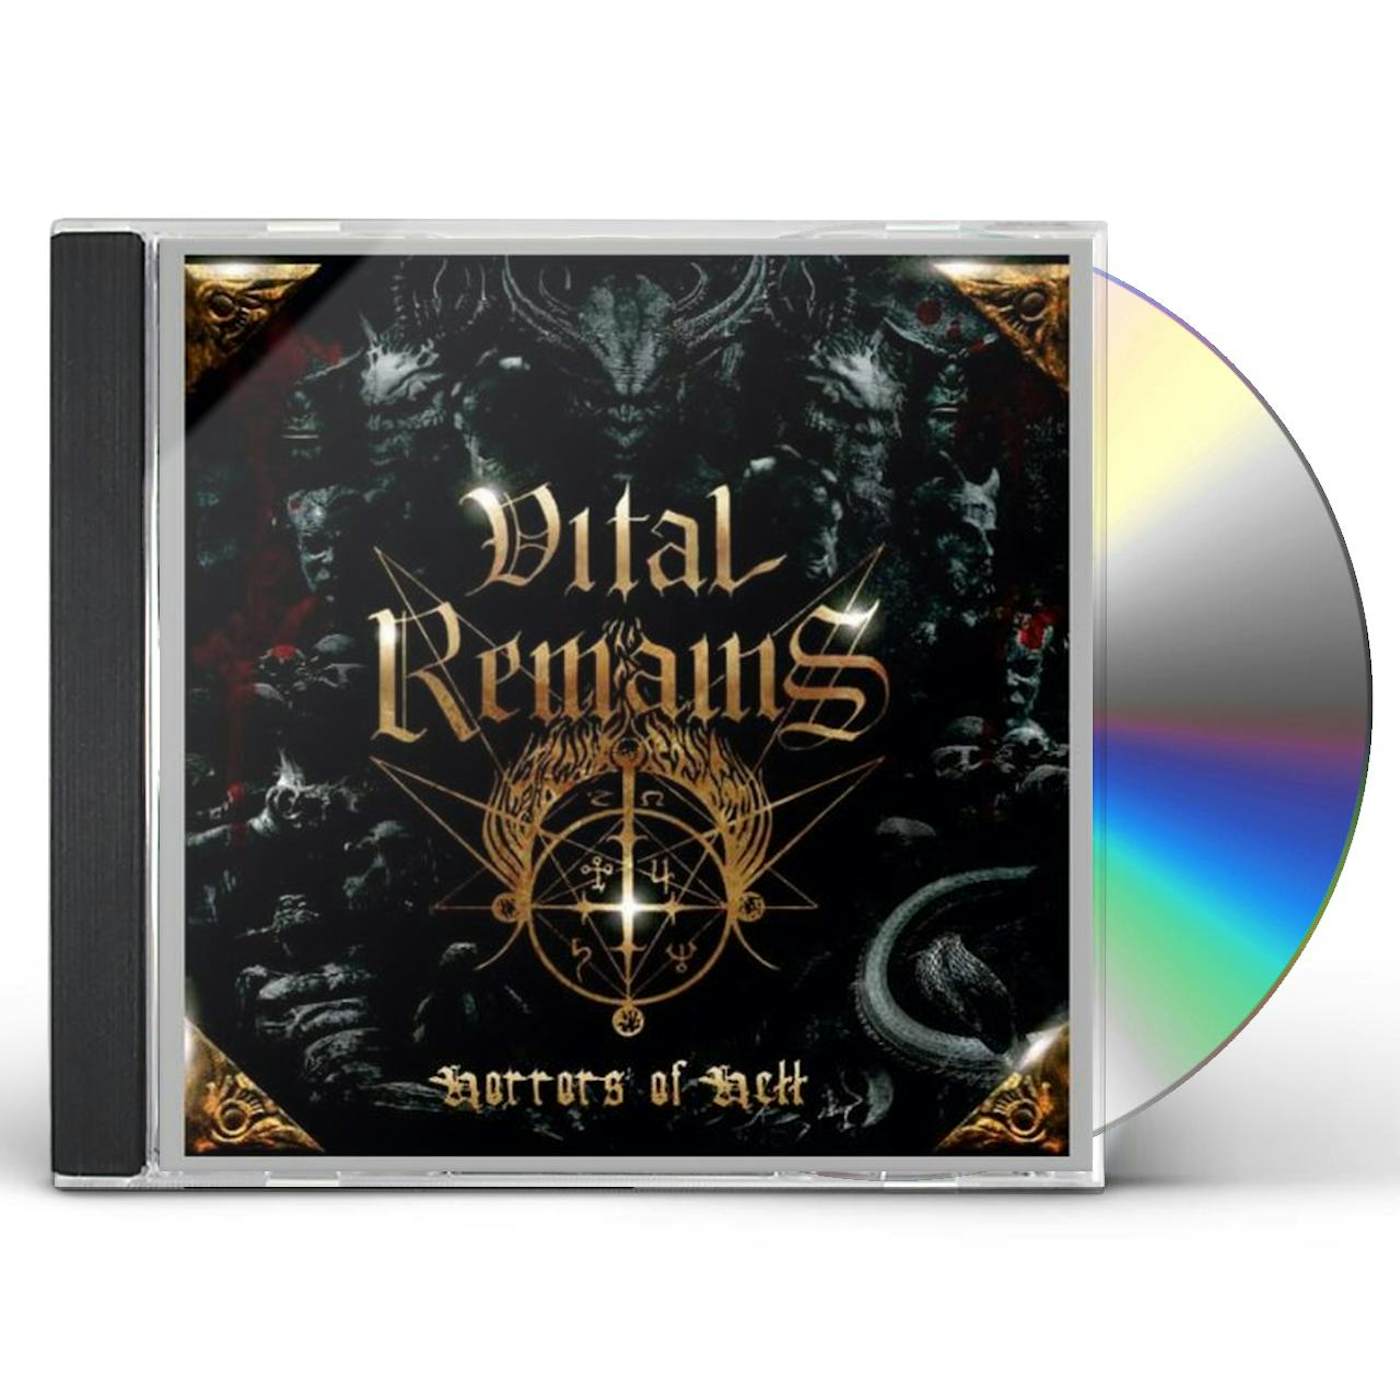 Vital Remains HORRORS OF HELL CD